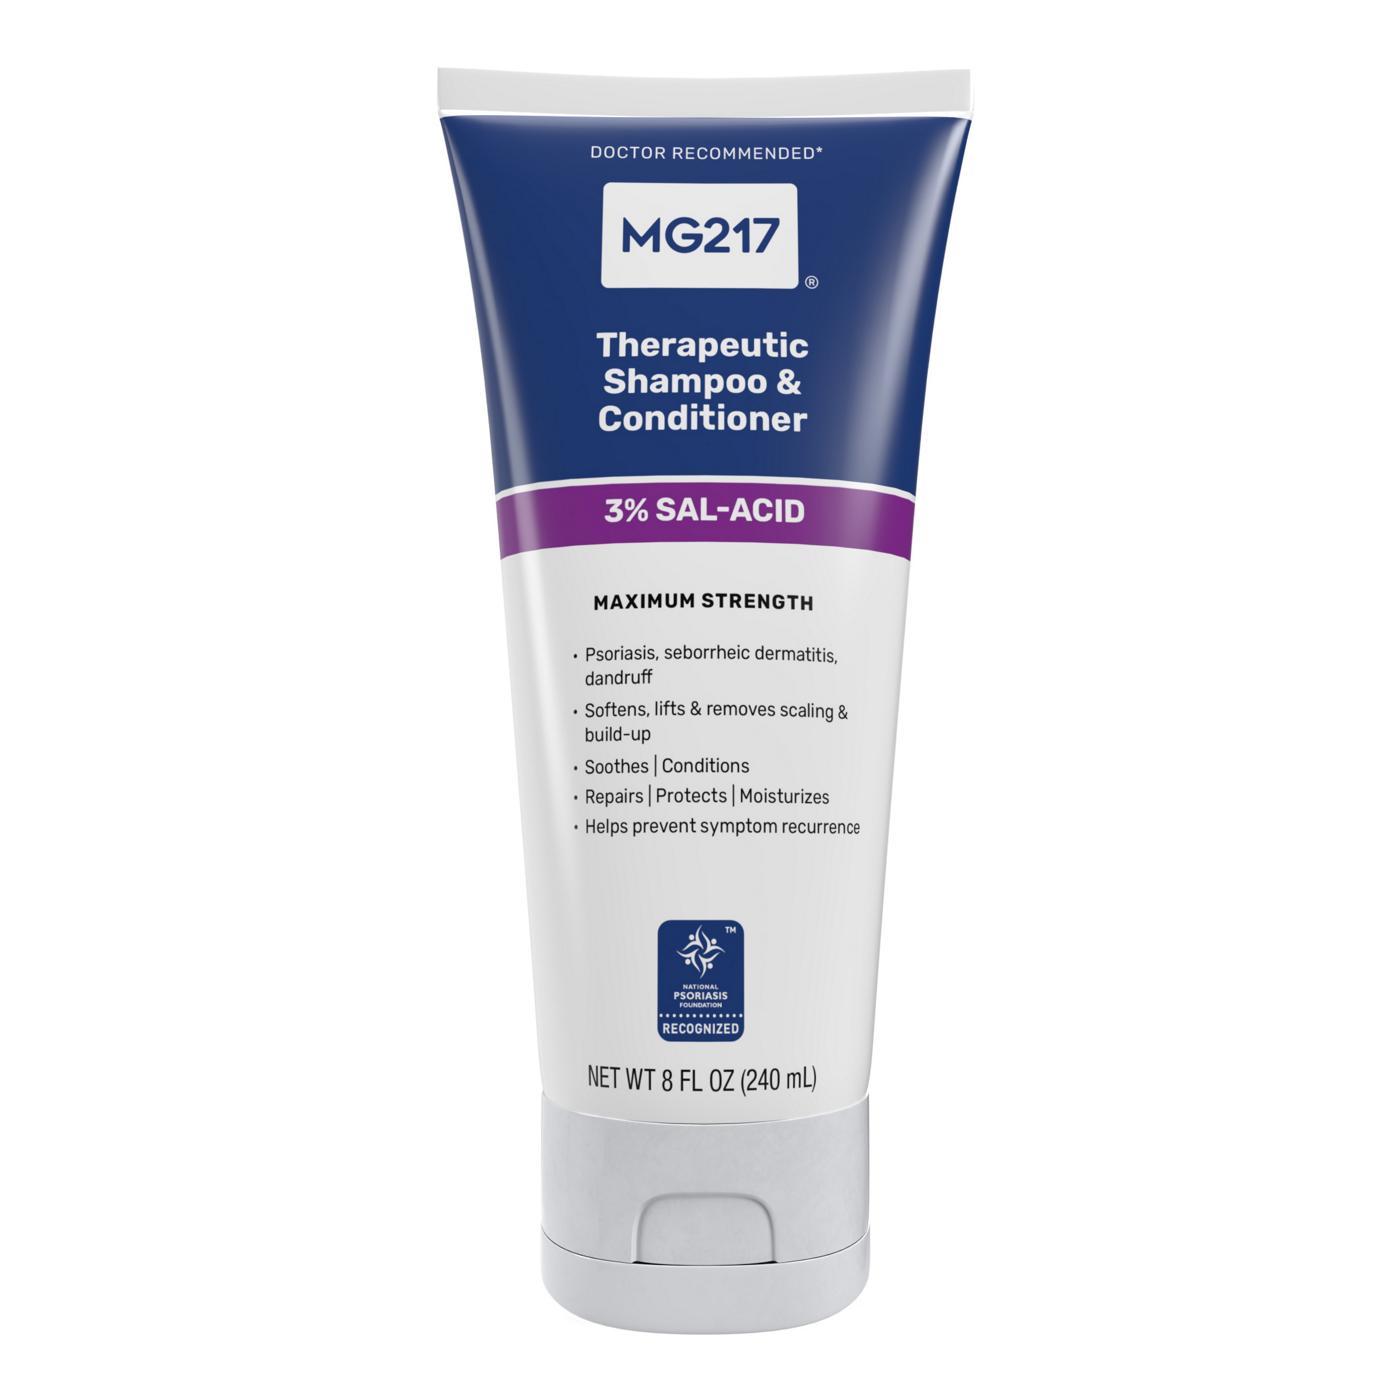 MG217 Therapeutic 3% SAL-ACID Shampoo & Conditioner; image 1 of 3